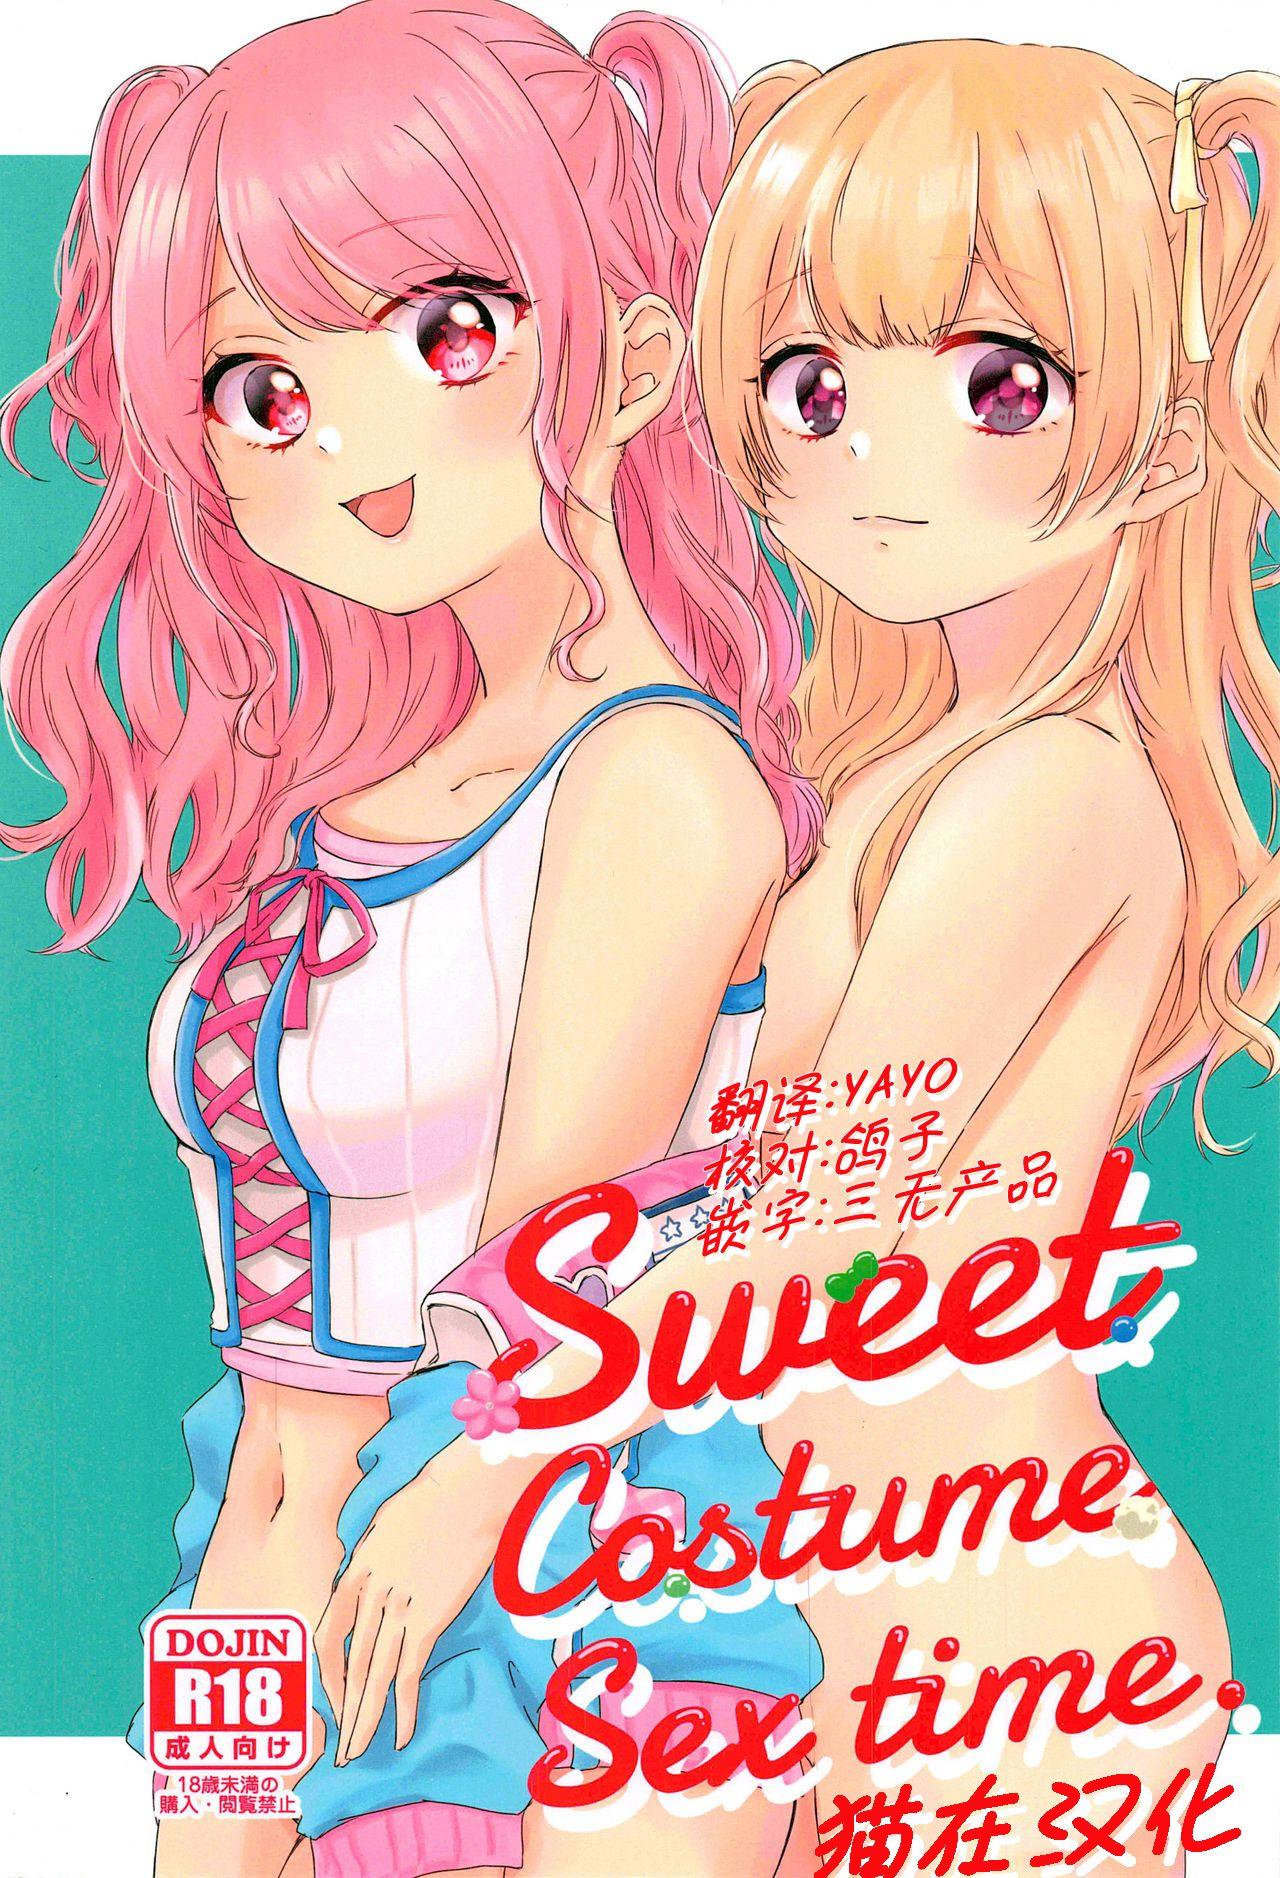 Sweet Costume Sex time. 0